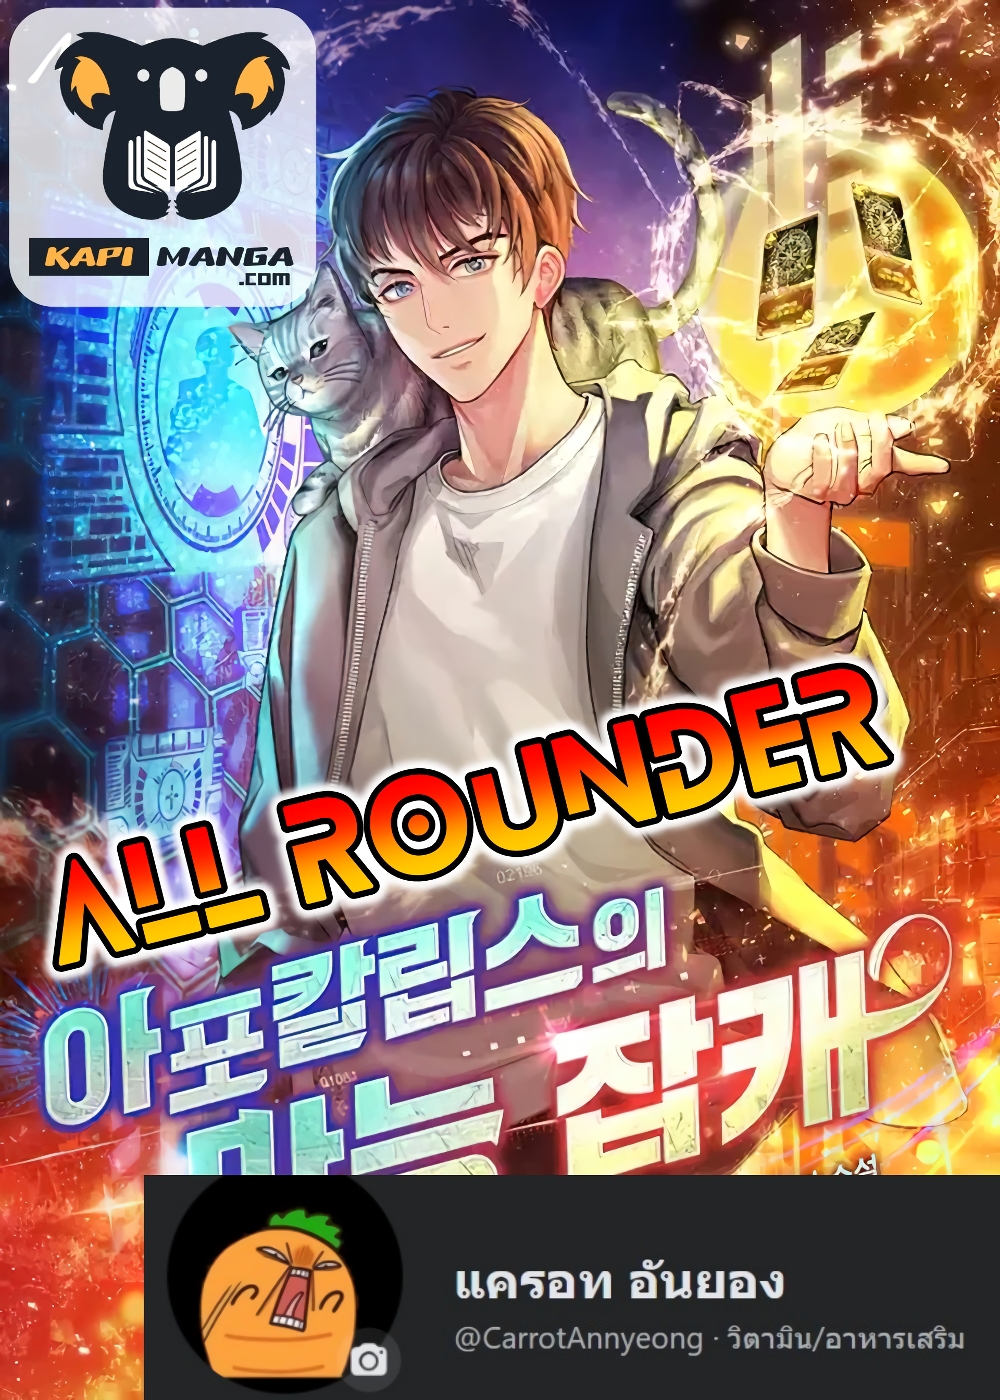 All Rounder1 (1)